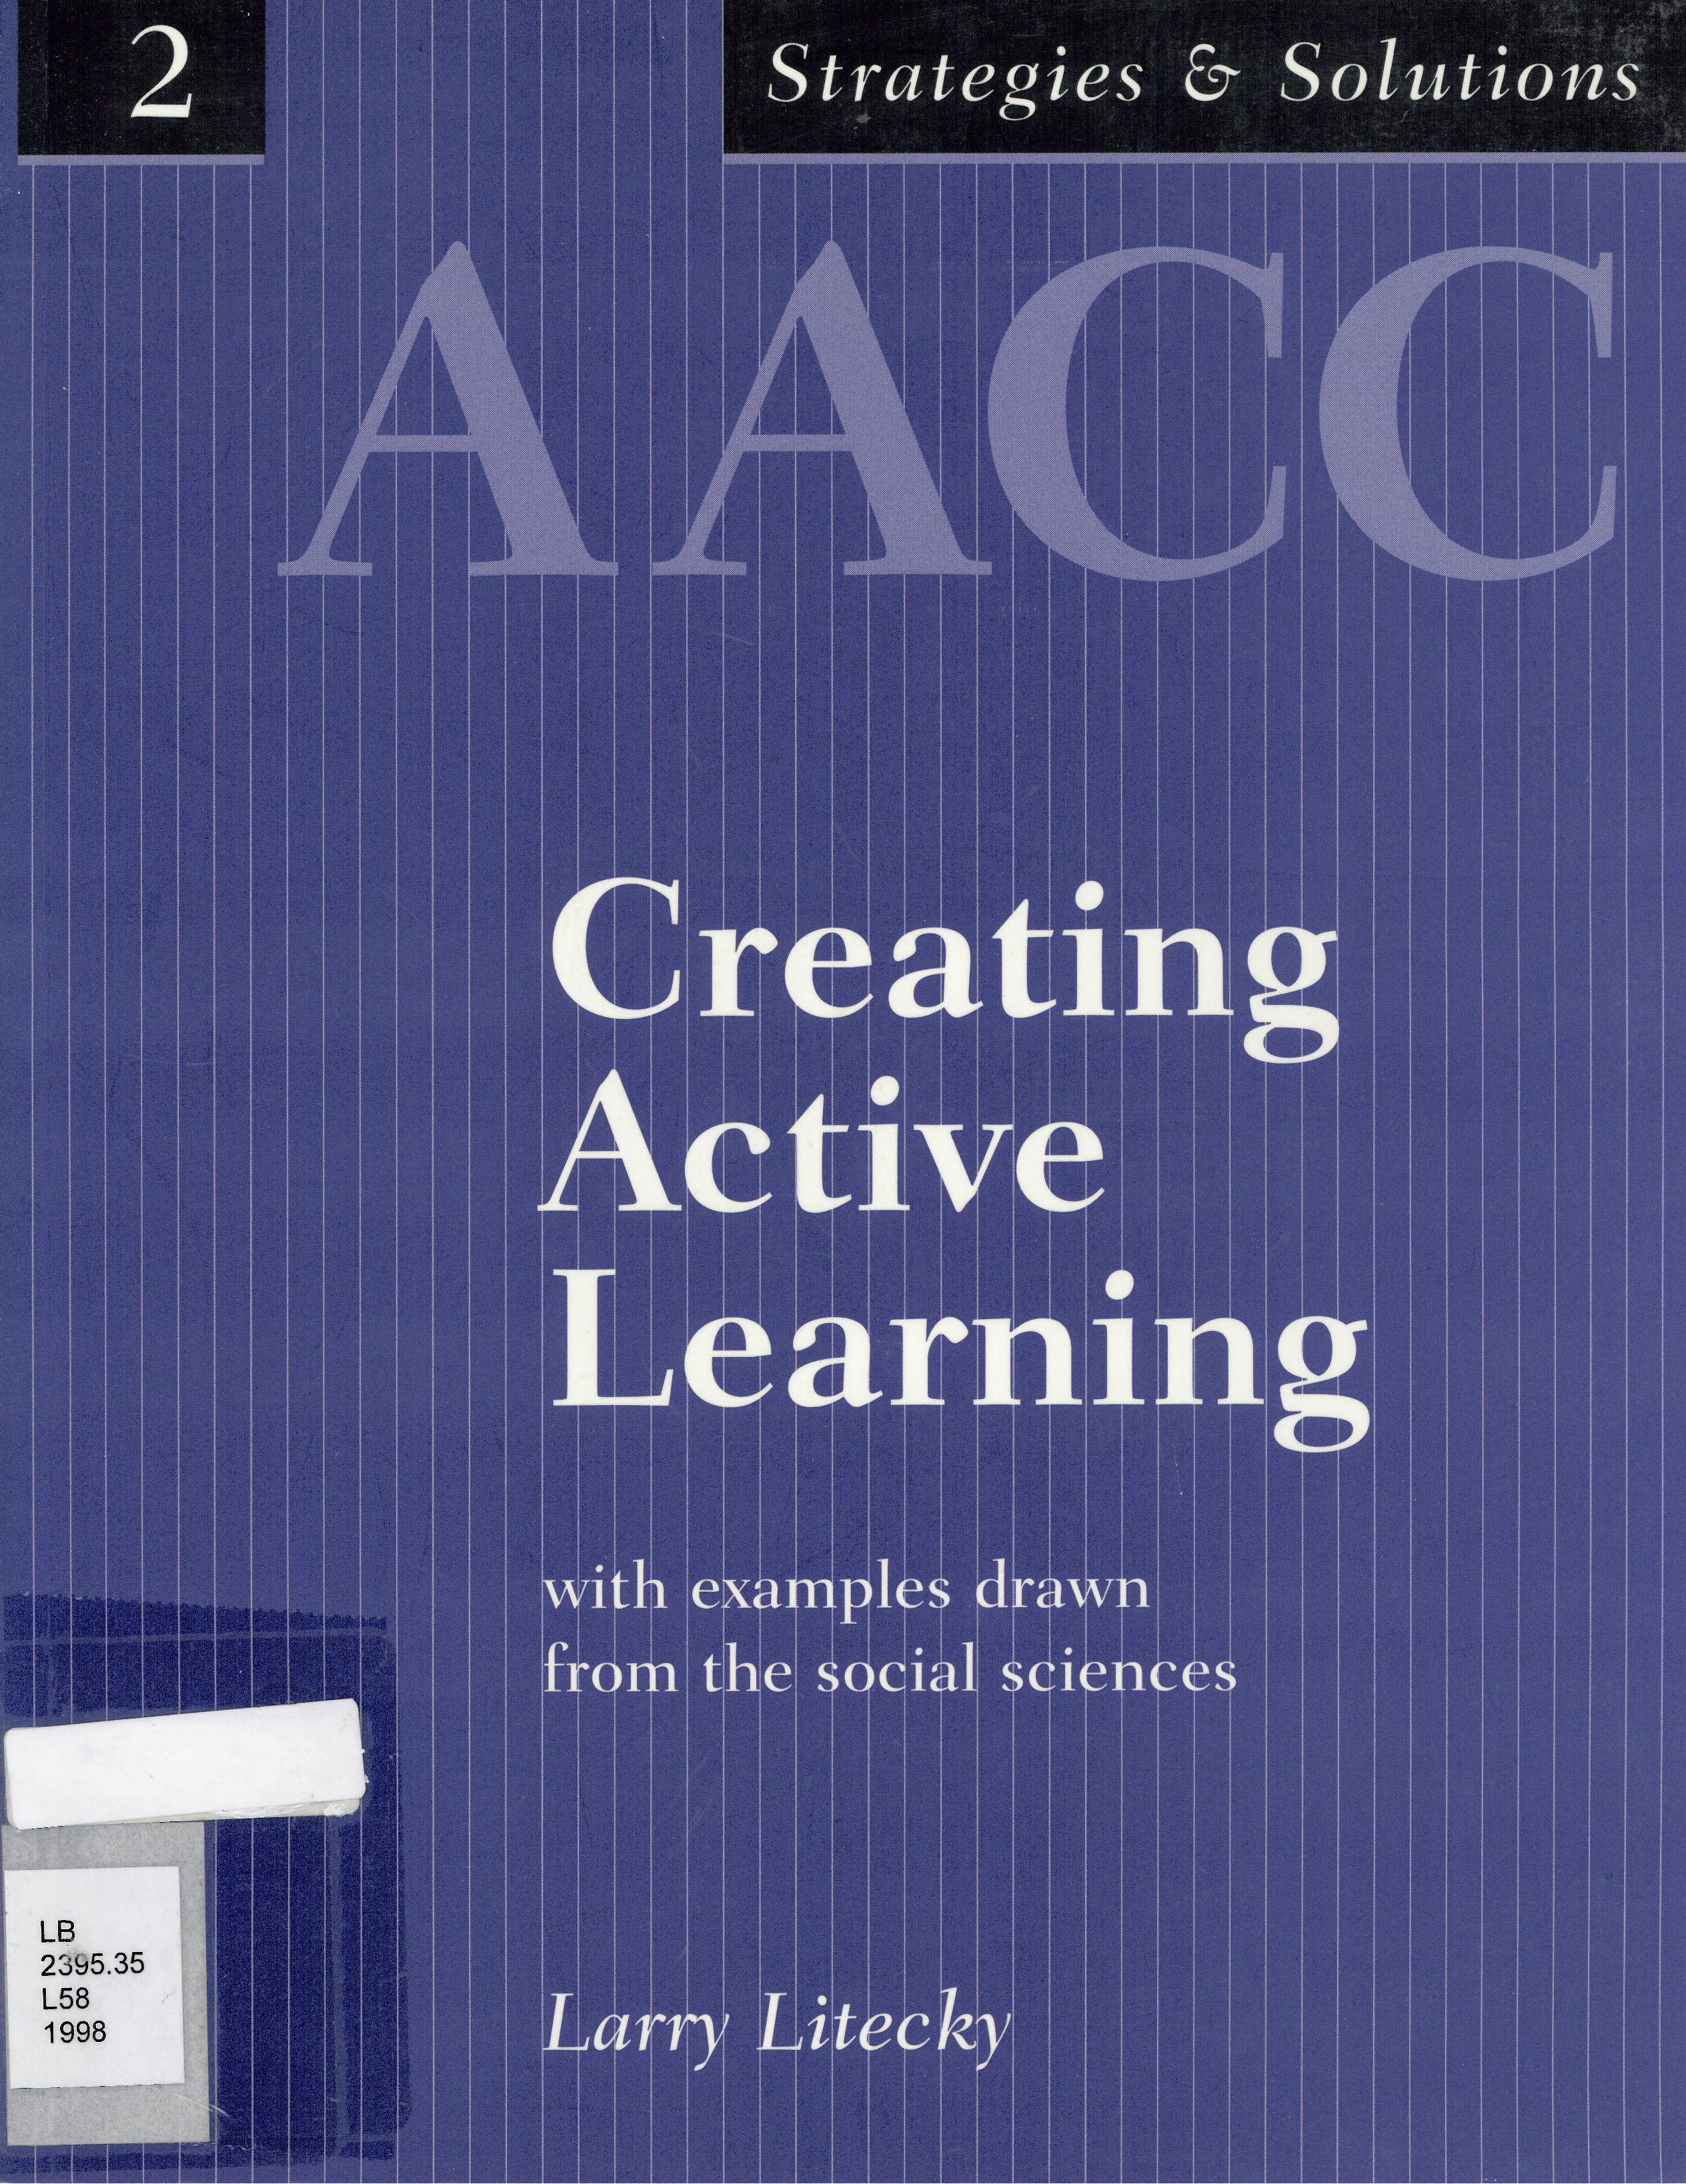 Creating active learning : with examples drawn from the social sciences